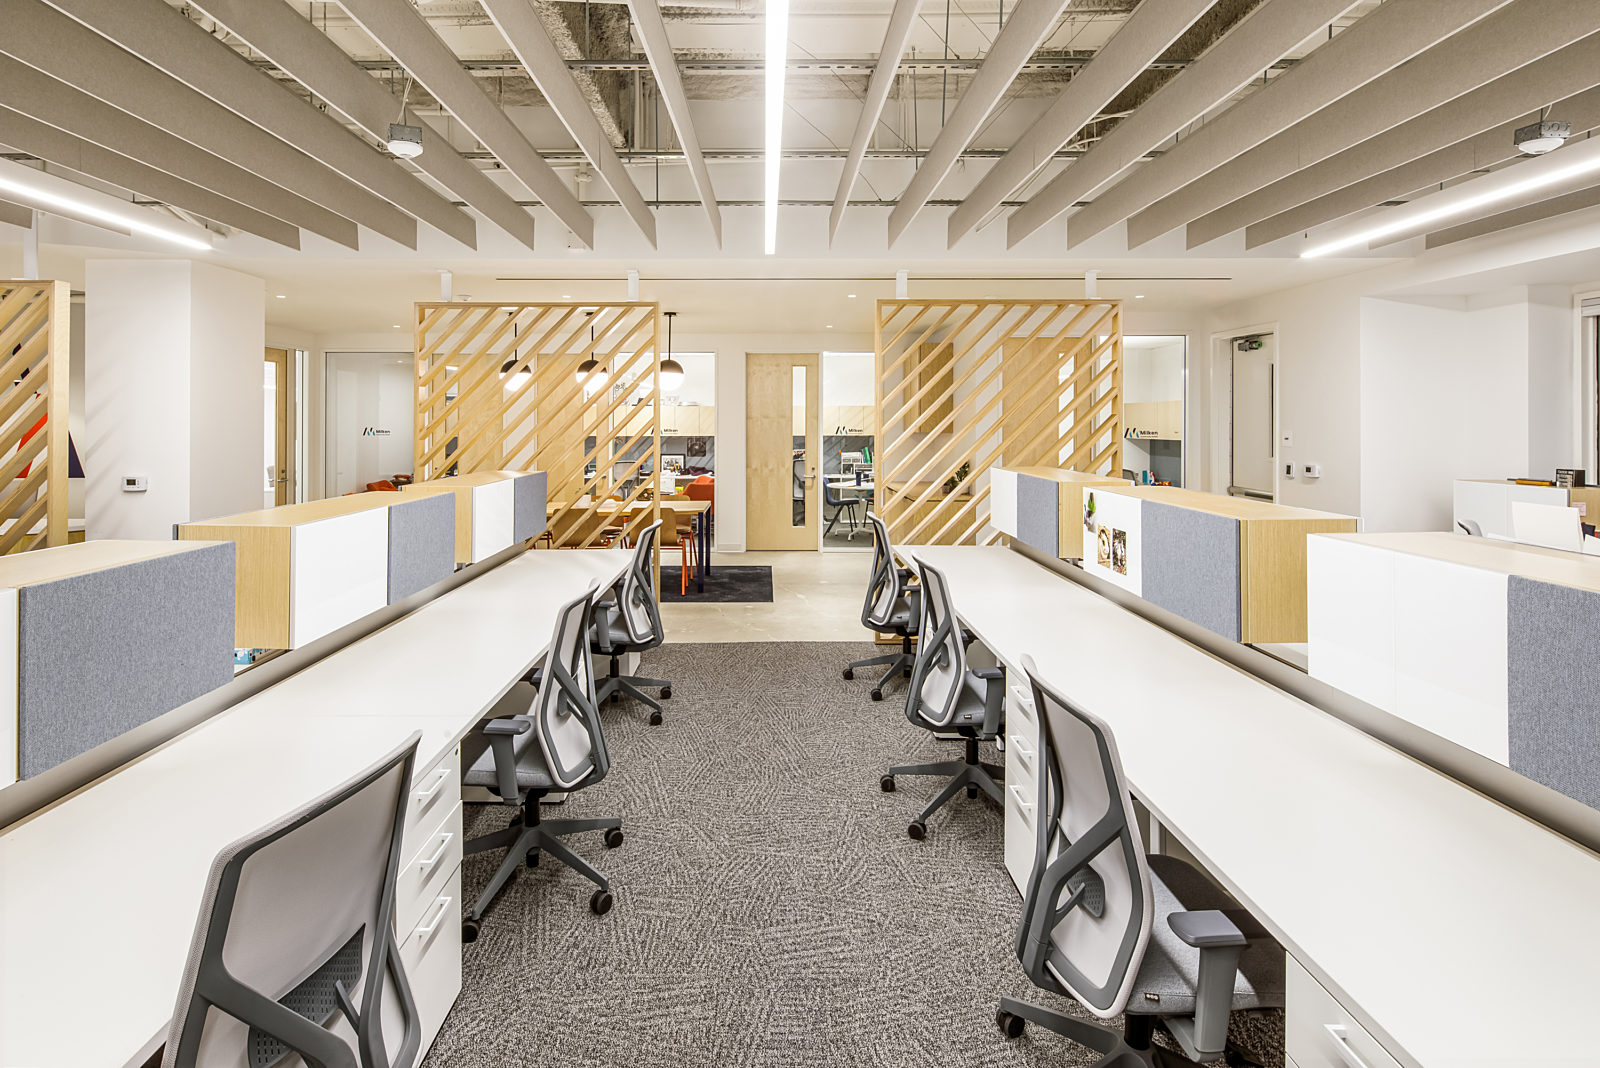 In front of the conference rooms, rows of workstations sit parallel to each other behind a wooden partition wall.